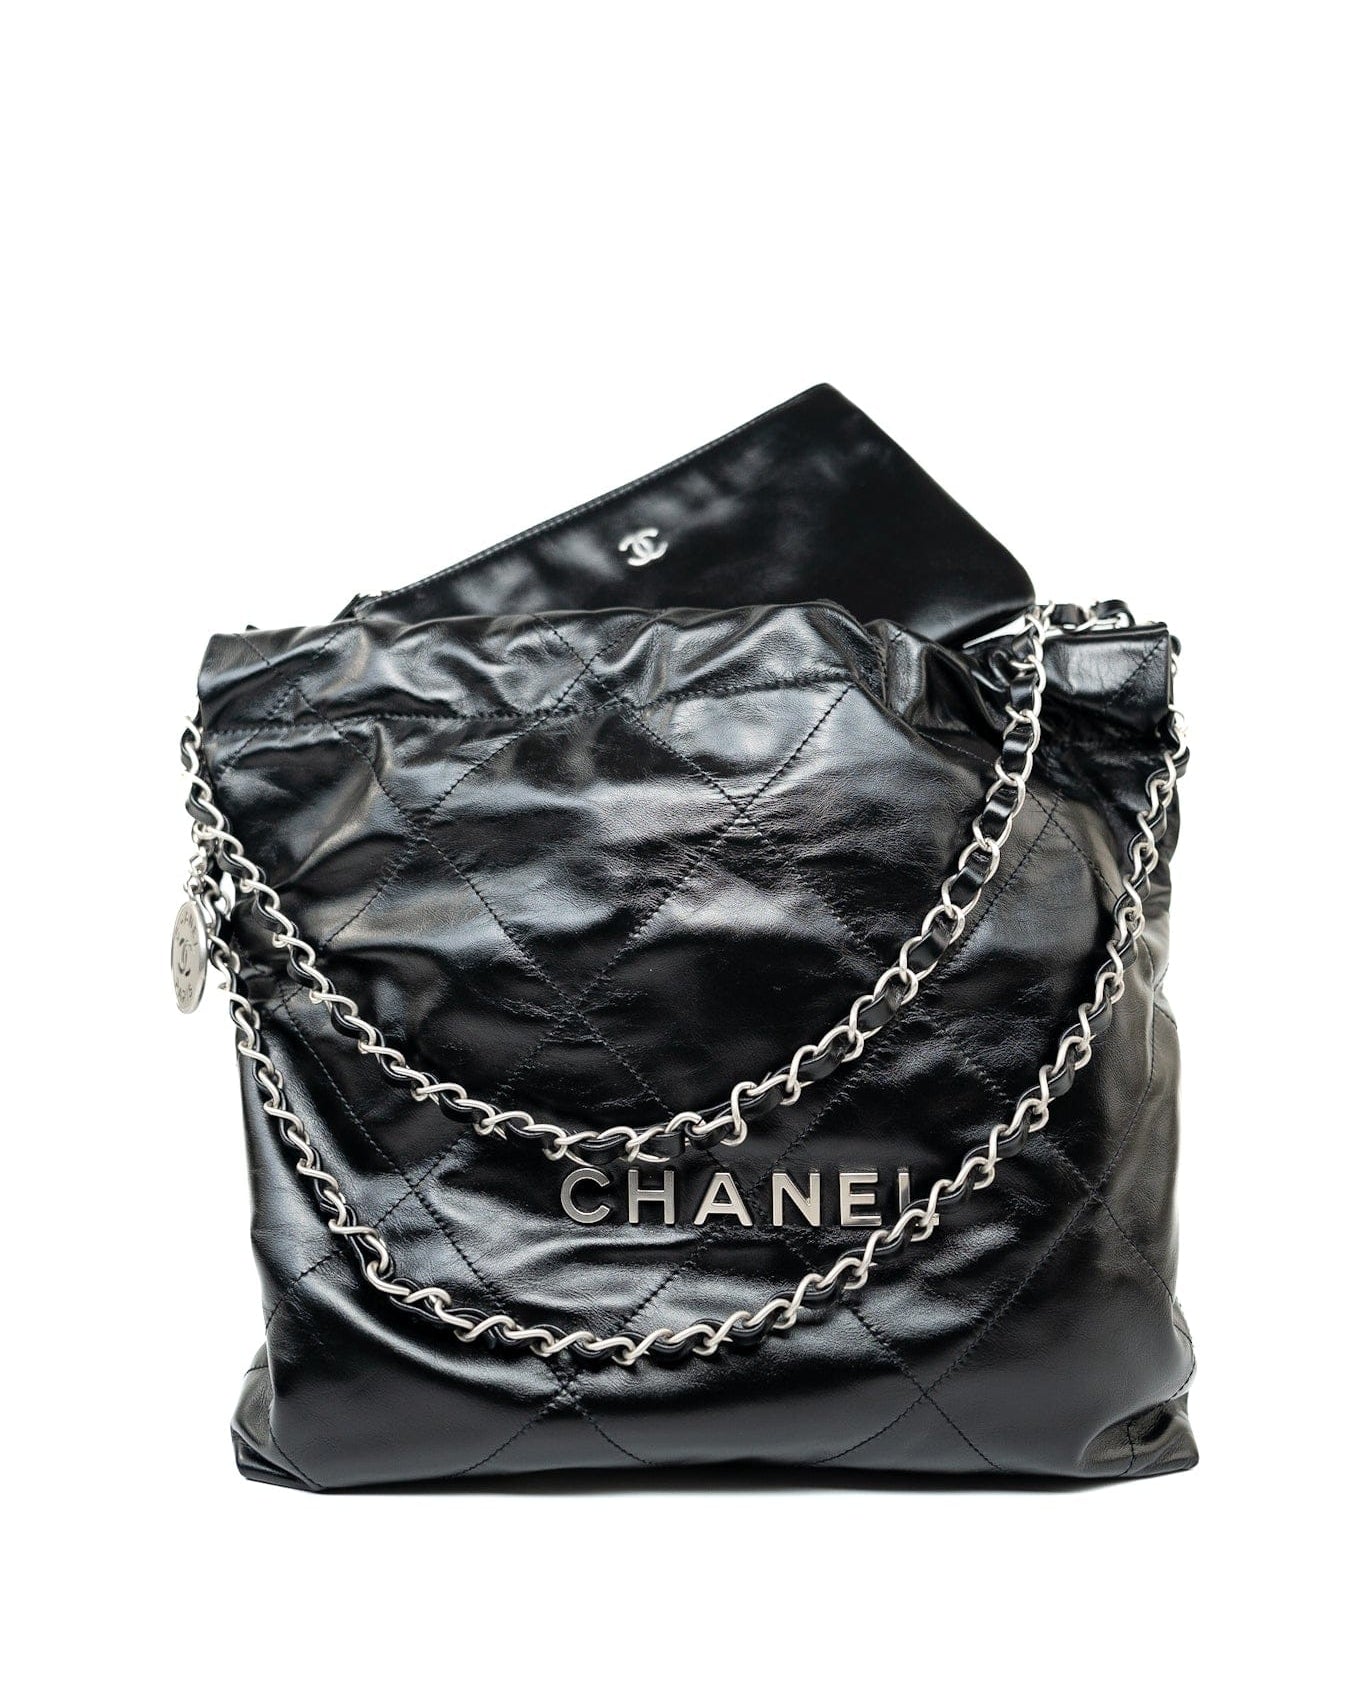 CHANEL Handbag Black Calfskin Quilted 22 Bag Small Aged Silver Hardware - Redeluxe